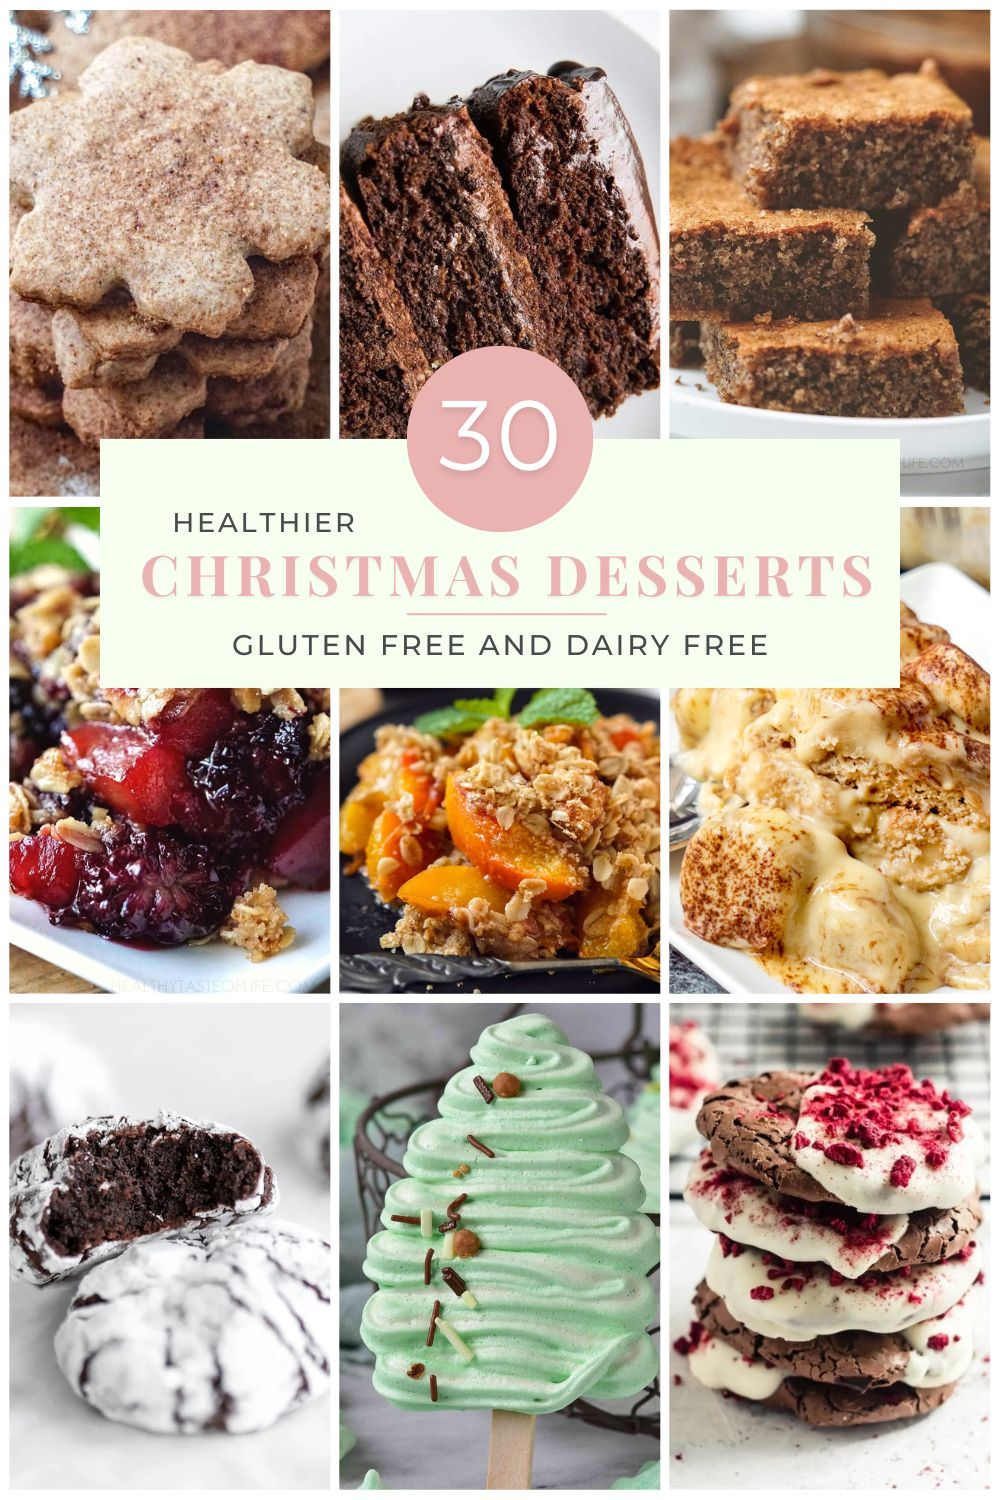 Healthier gluten free Christmas desserts, from fruit based desserts to those made with alternative flours and healthier ingredients. From cookies to cakes and pies these are sweet, decadent and lighter to your stomach, so you can indulge in your favorite Christmas desserts without feeling guilty. Most of them are naturally gluten free, dairy free and some vegan friendly perfect to celebrate any holiday! #christmas #desserts #glutenfree #dairyfree #recipes #holidays #treats #healthy